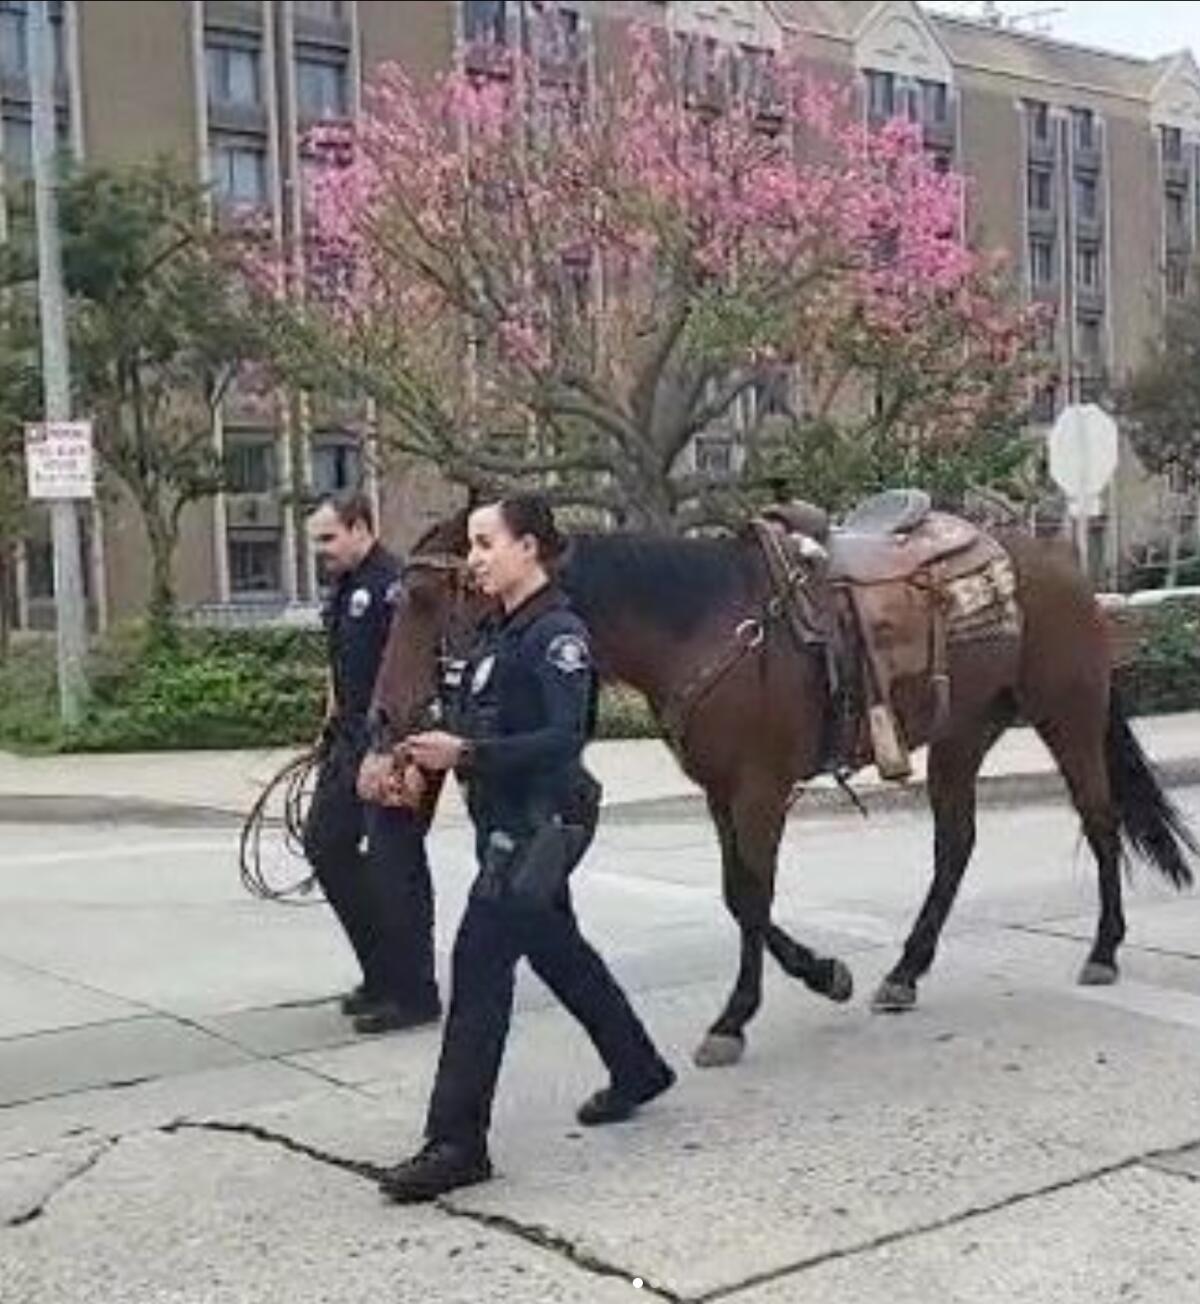 Two police officers lead a saddled horse.